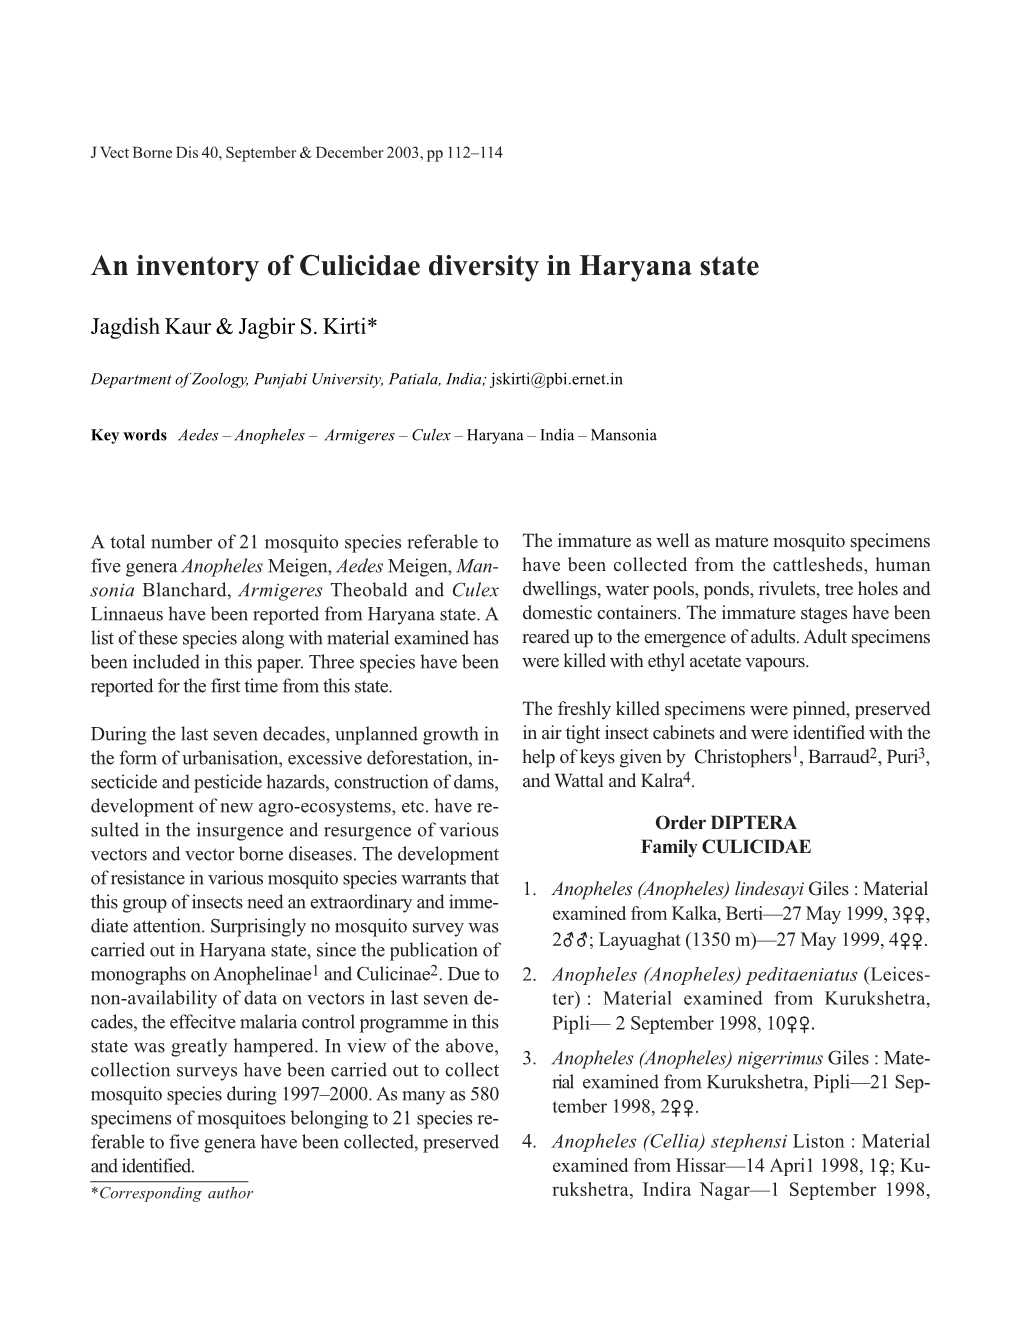 An Inventory of Culicidae Diversity in Haryana State